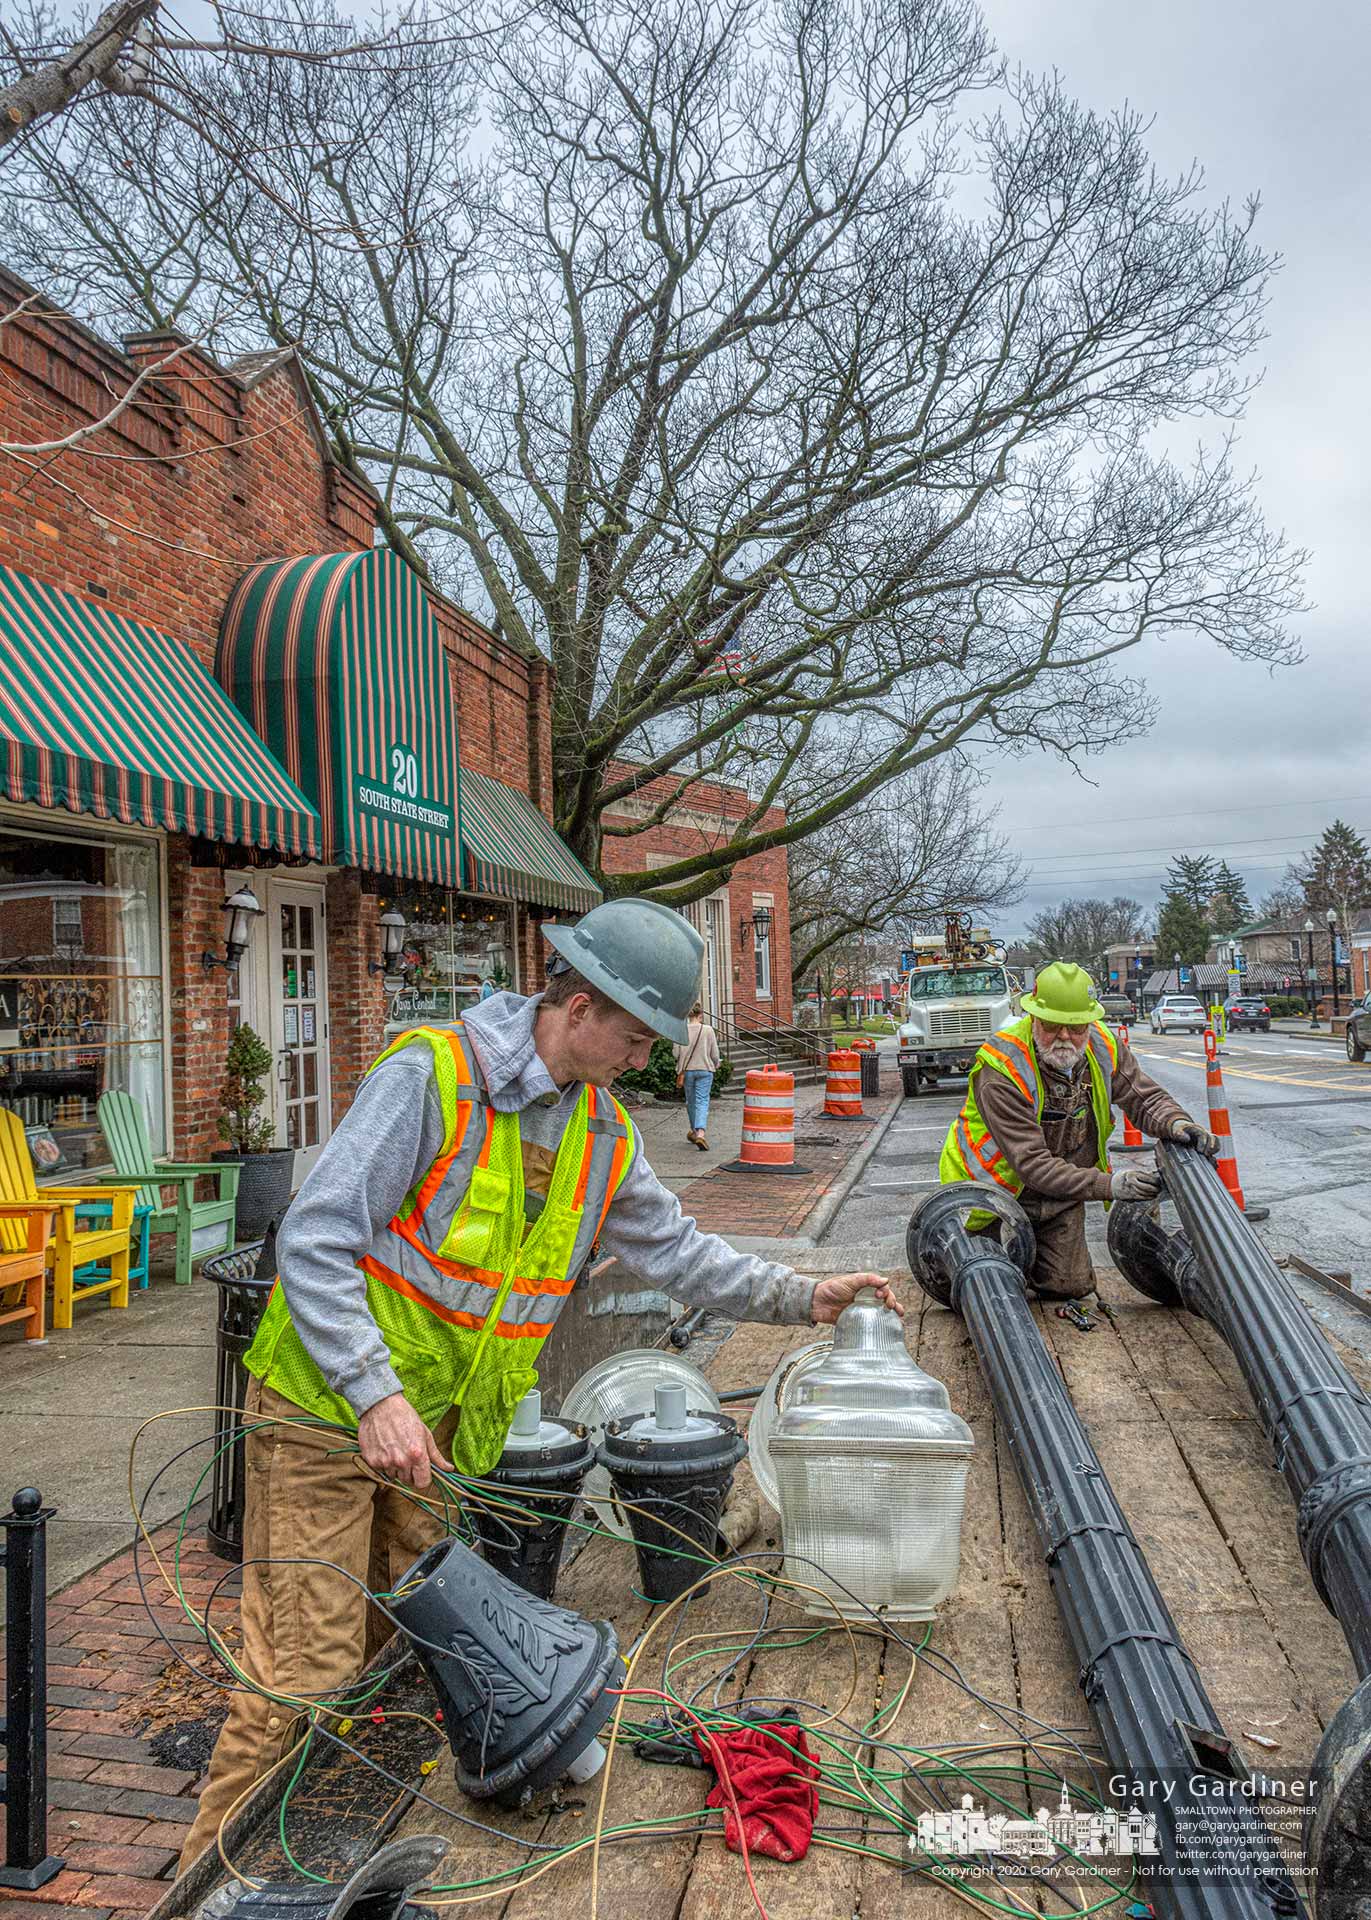 A crew removes street lamps near the oak tree between Java Central and the Westerville Police detective bureau as the first step in creating a new walkway that will protect the exposed roots and trunk of the tree when the Uptown improvement project is complete. My Final Photo for March 3, 2020.